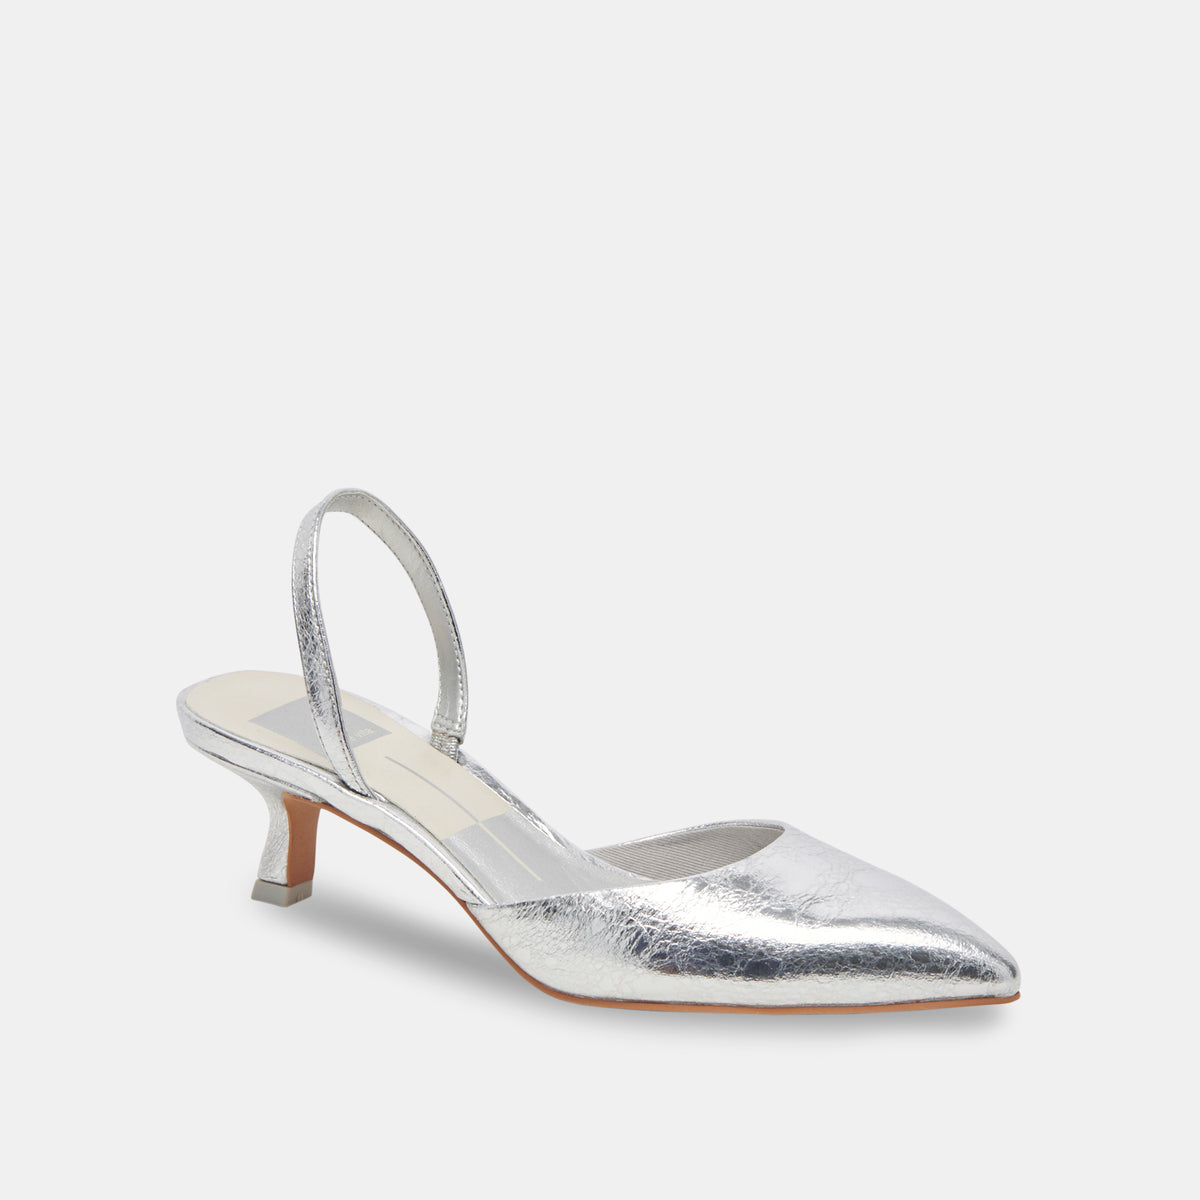 Corsa Heels Silver Cracked Leather | Silver Leather Heels – Dolce Vita